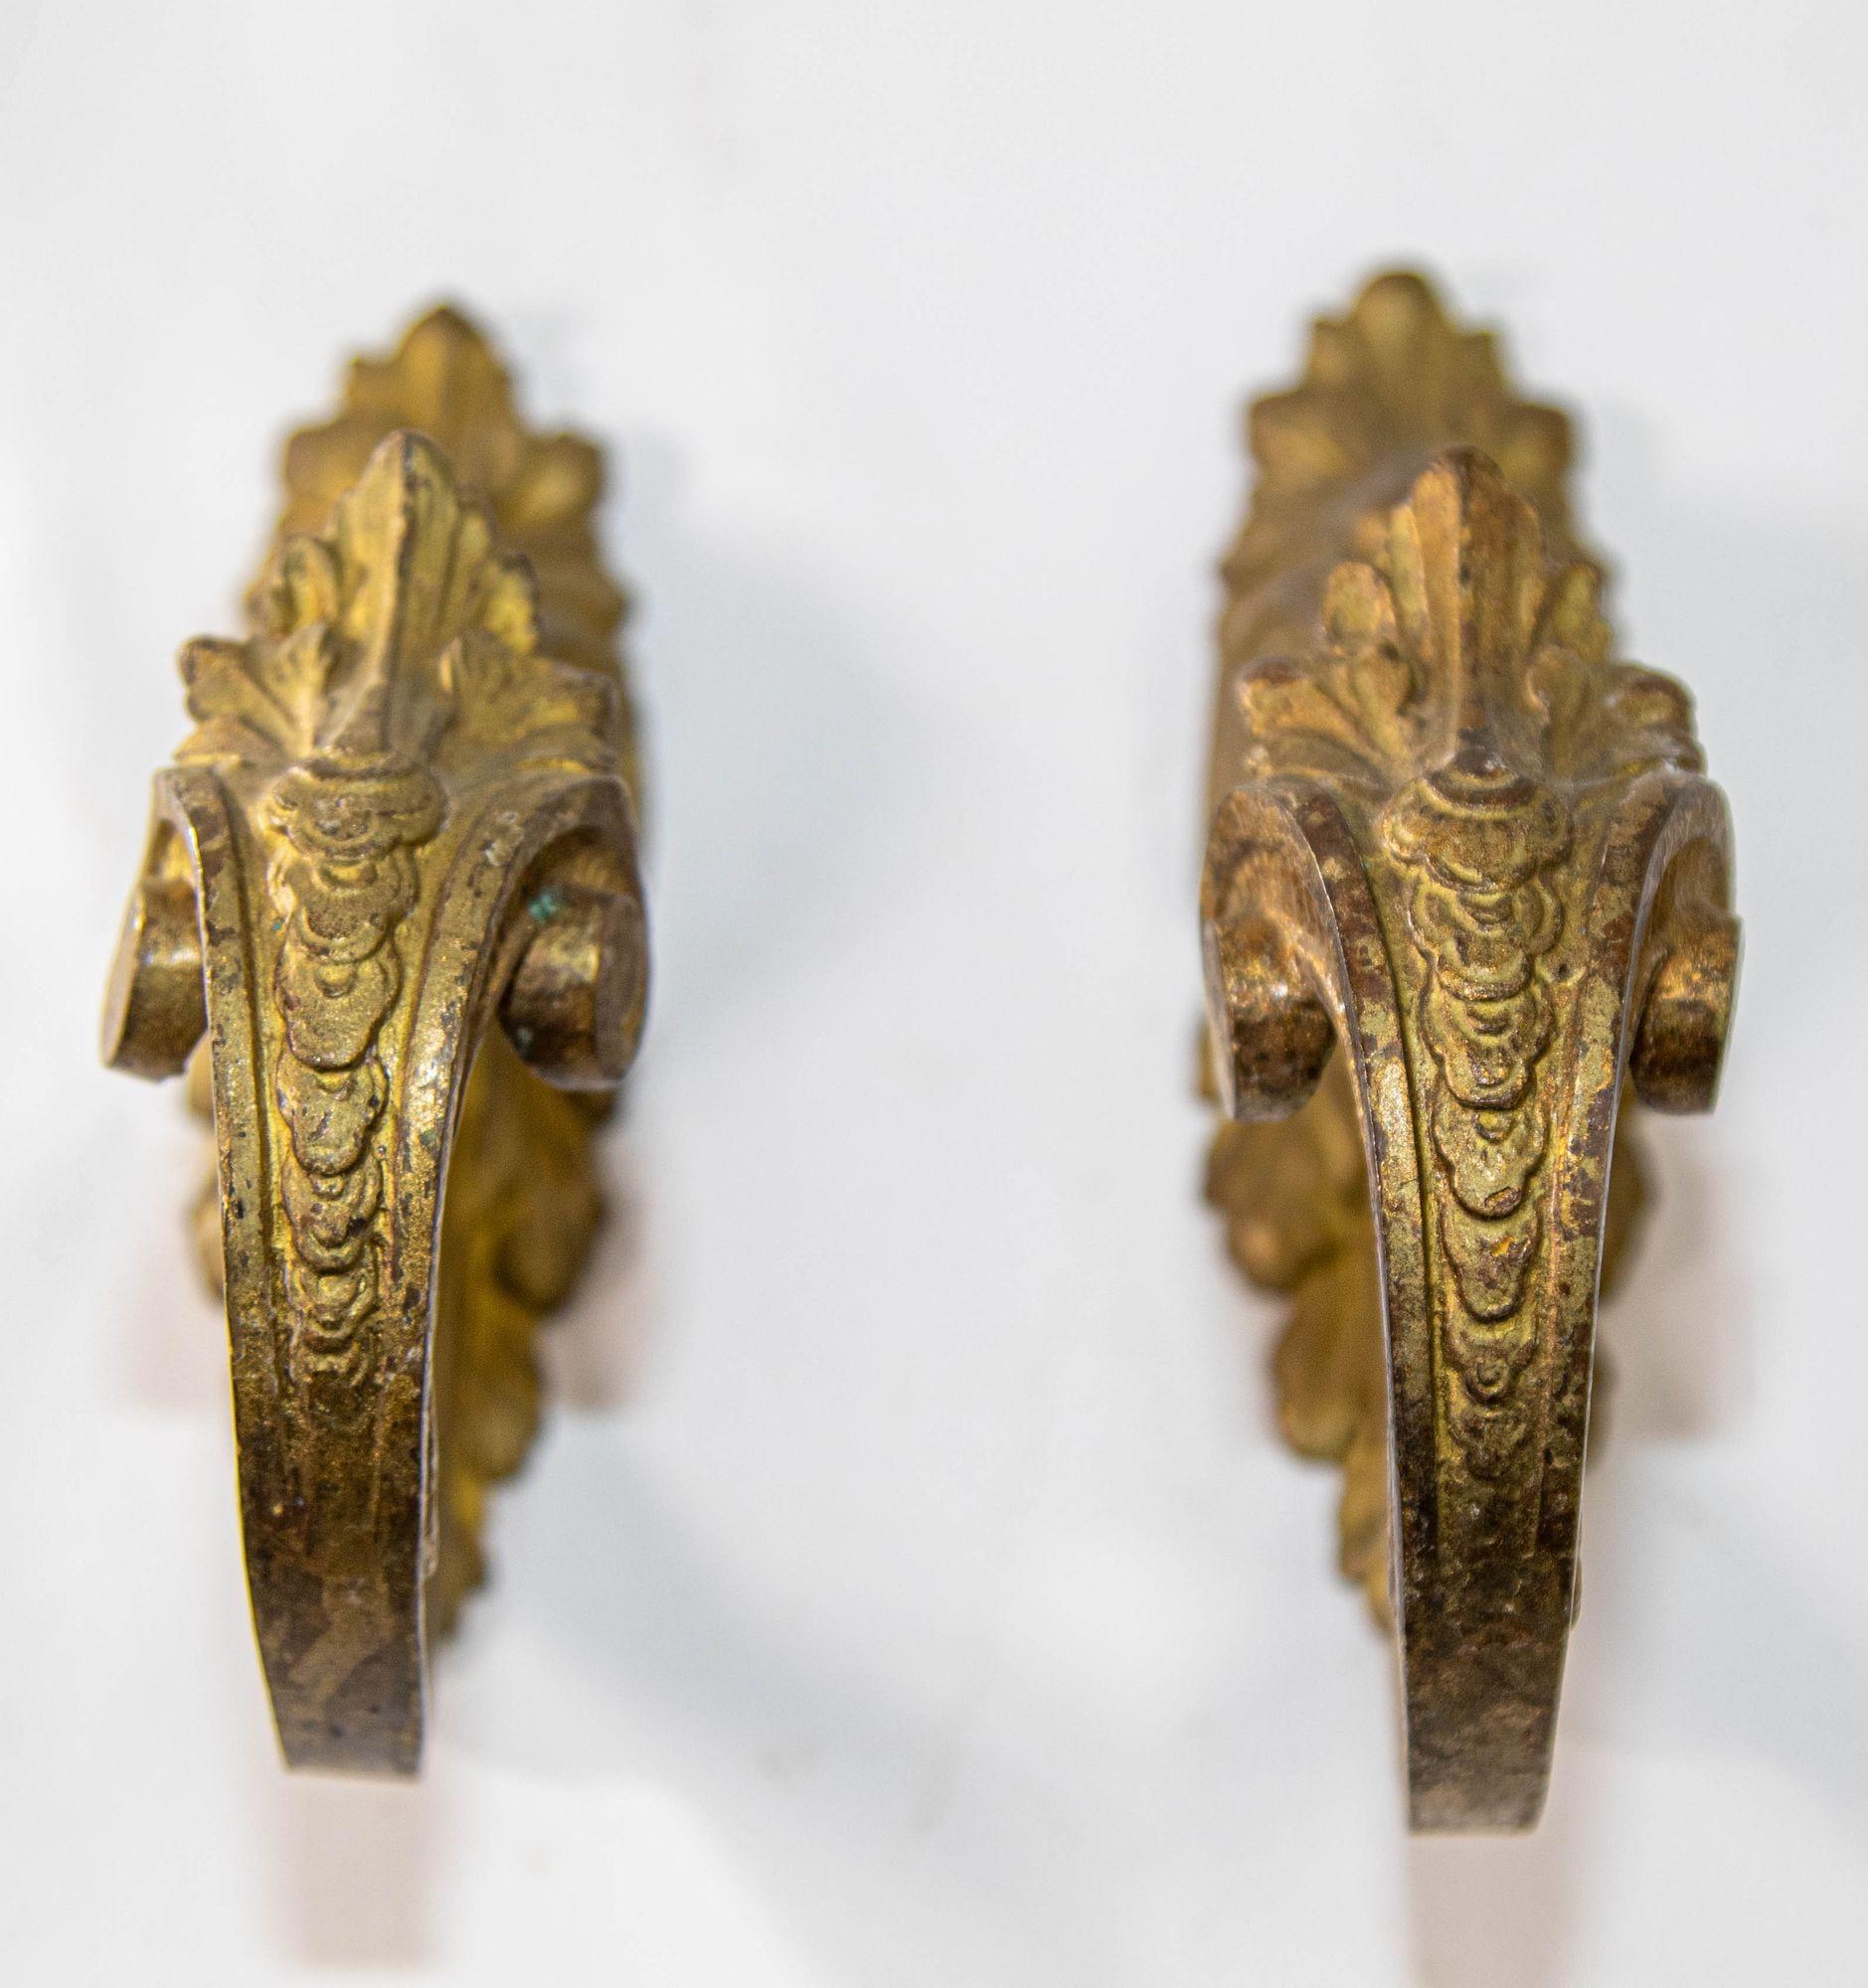 Pair of Louis XIV Style Gilt Bronze Curtain Hooks or Tie Backs. Set of 2.
A gorgeous antique pair of gilded cast bronze tiebacks in the Louis XIV style, dating from the late 19th century.
They are in good condition, with dark brass patina and wear